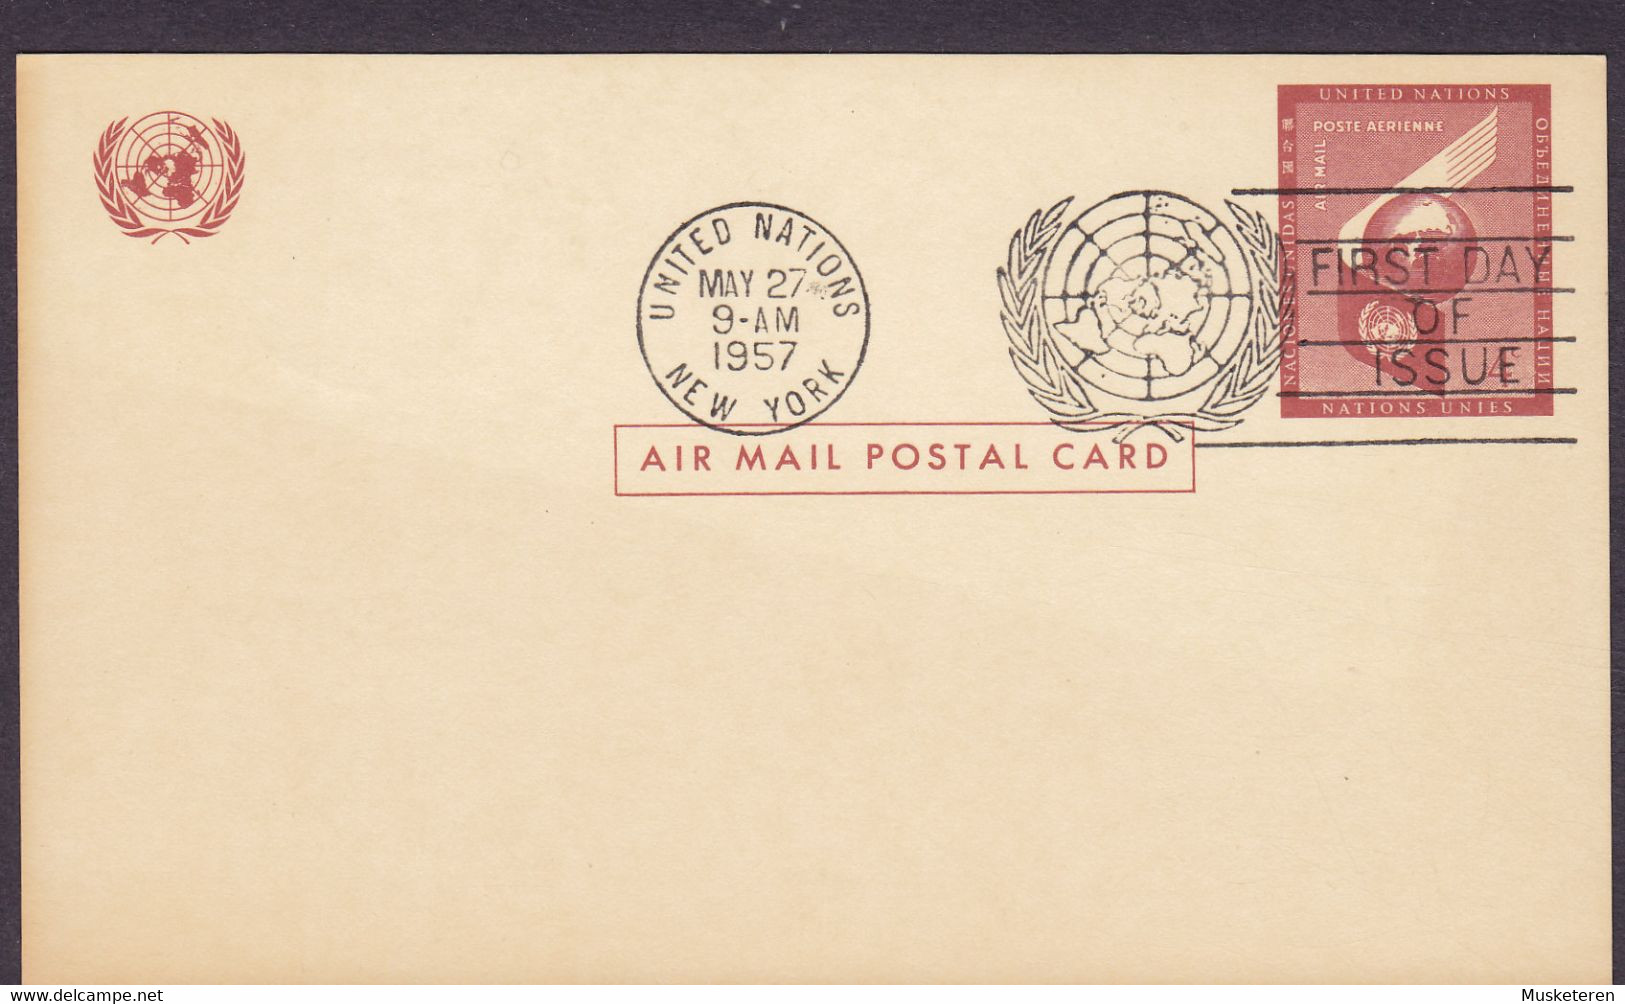 United Nations Postal Stationery Ganzsache Entier NEW YORK First Day Of Issue 1957 Air Mail Postal Card - Lettres & Documents